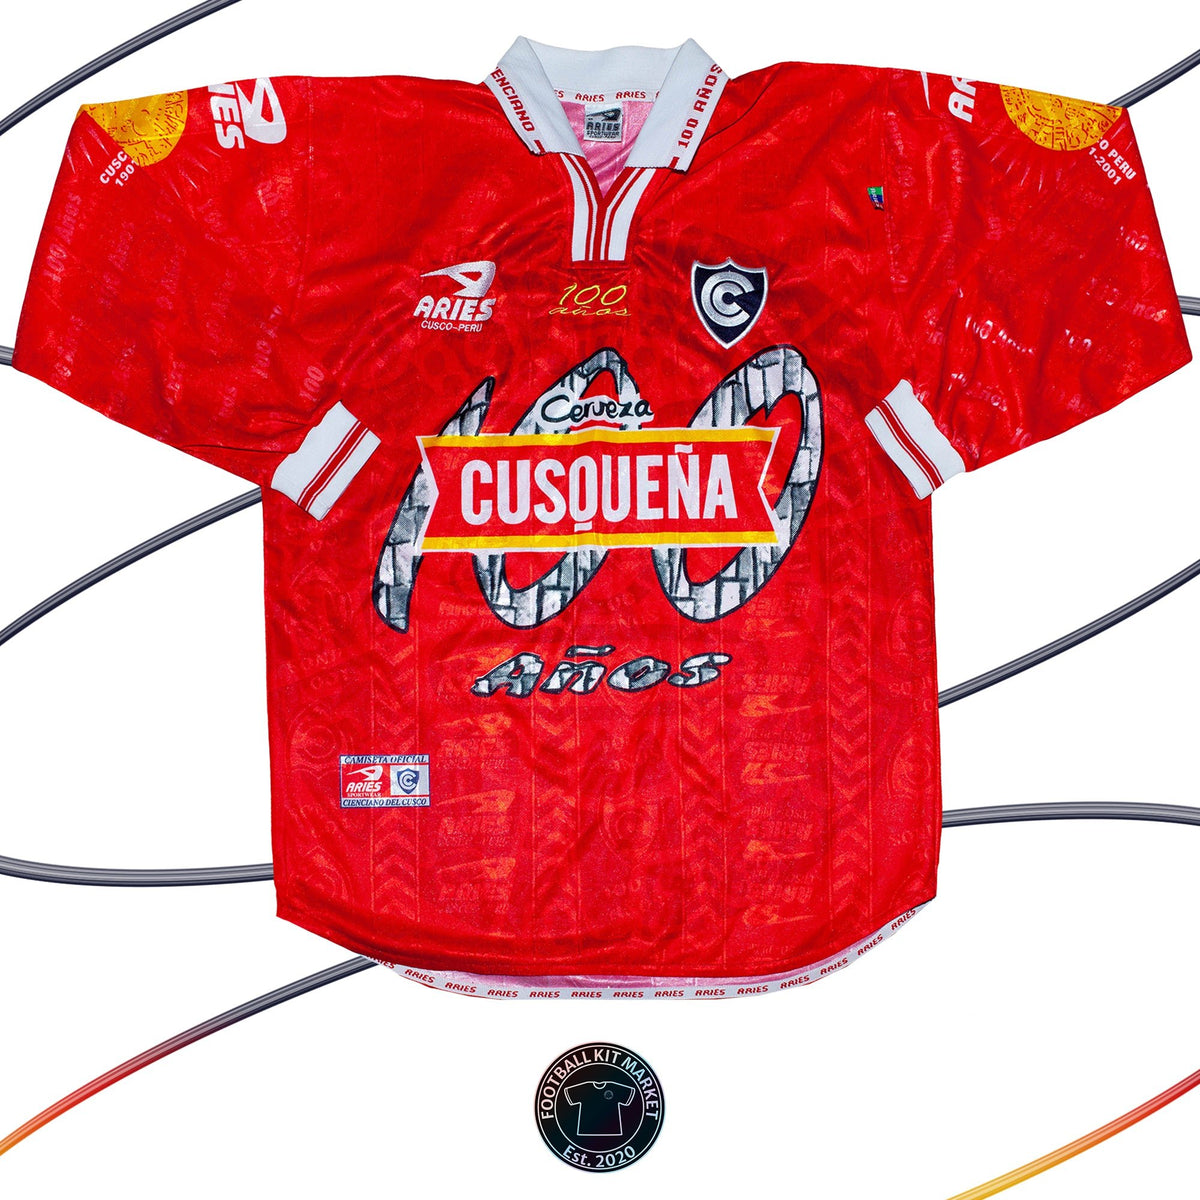 Genuine CIENCIANO DEL CUSCO Home Shirt (2001) - ARIES (XL) - Product Image from Football Kit Market